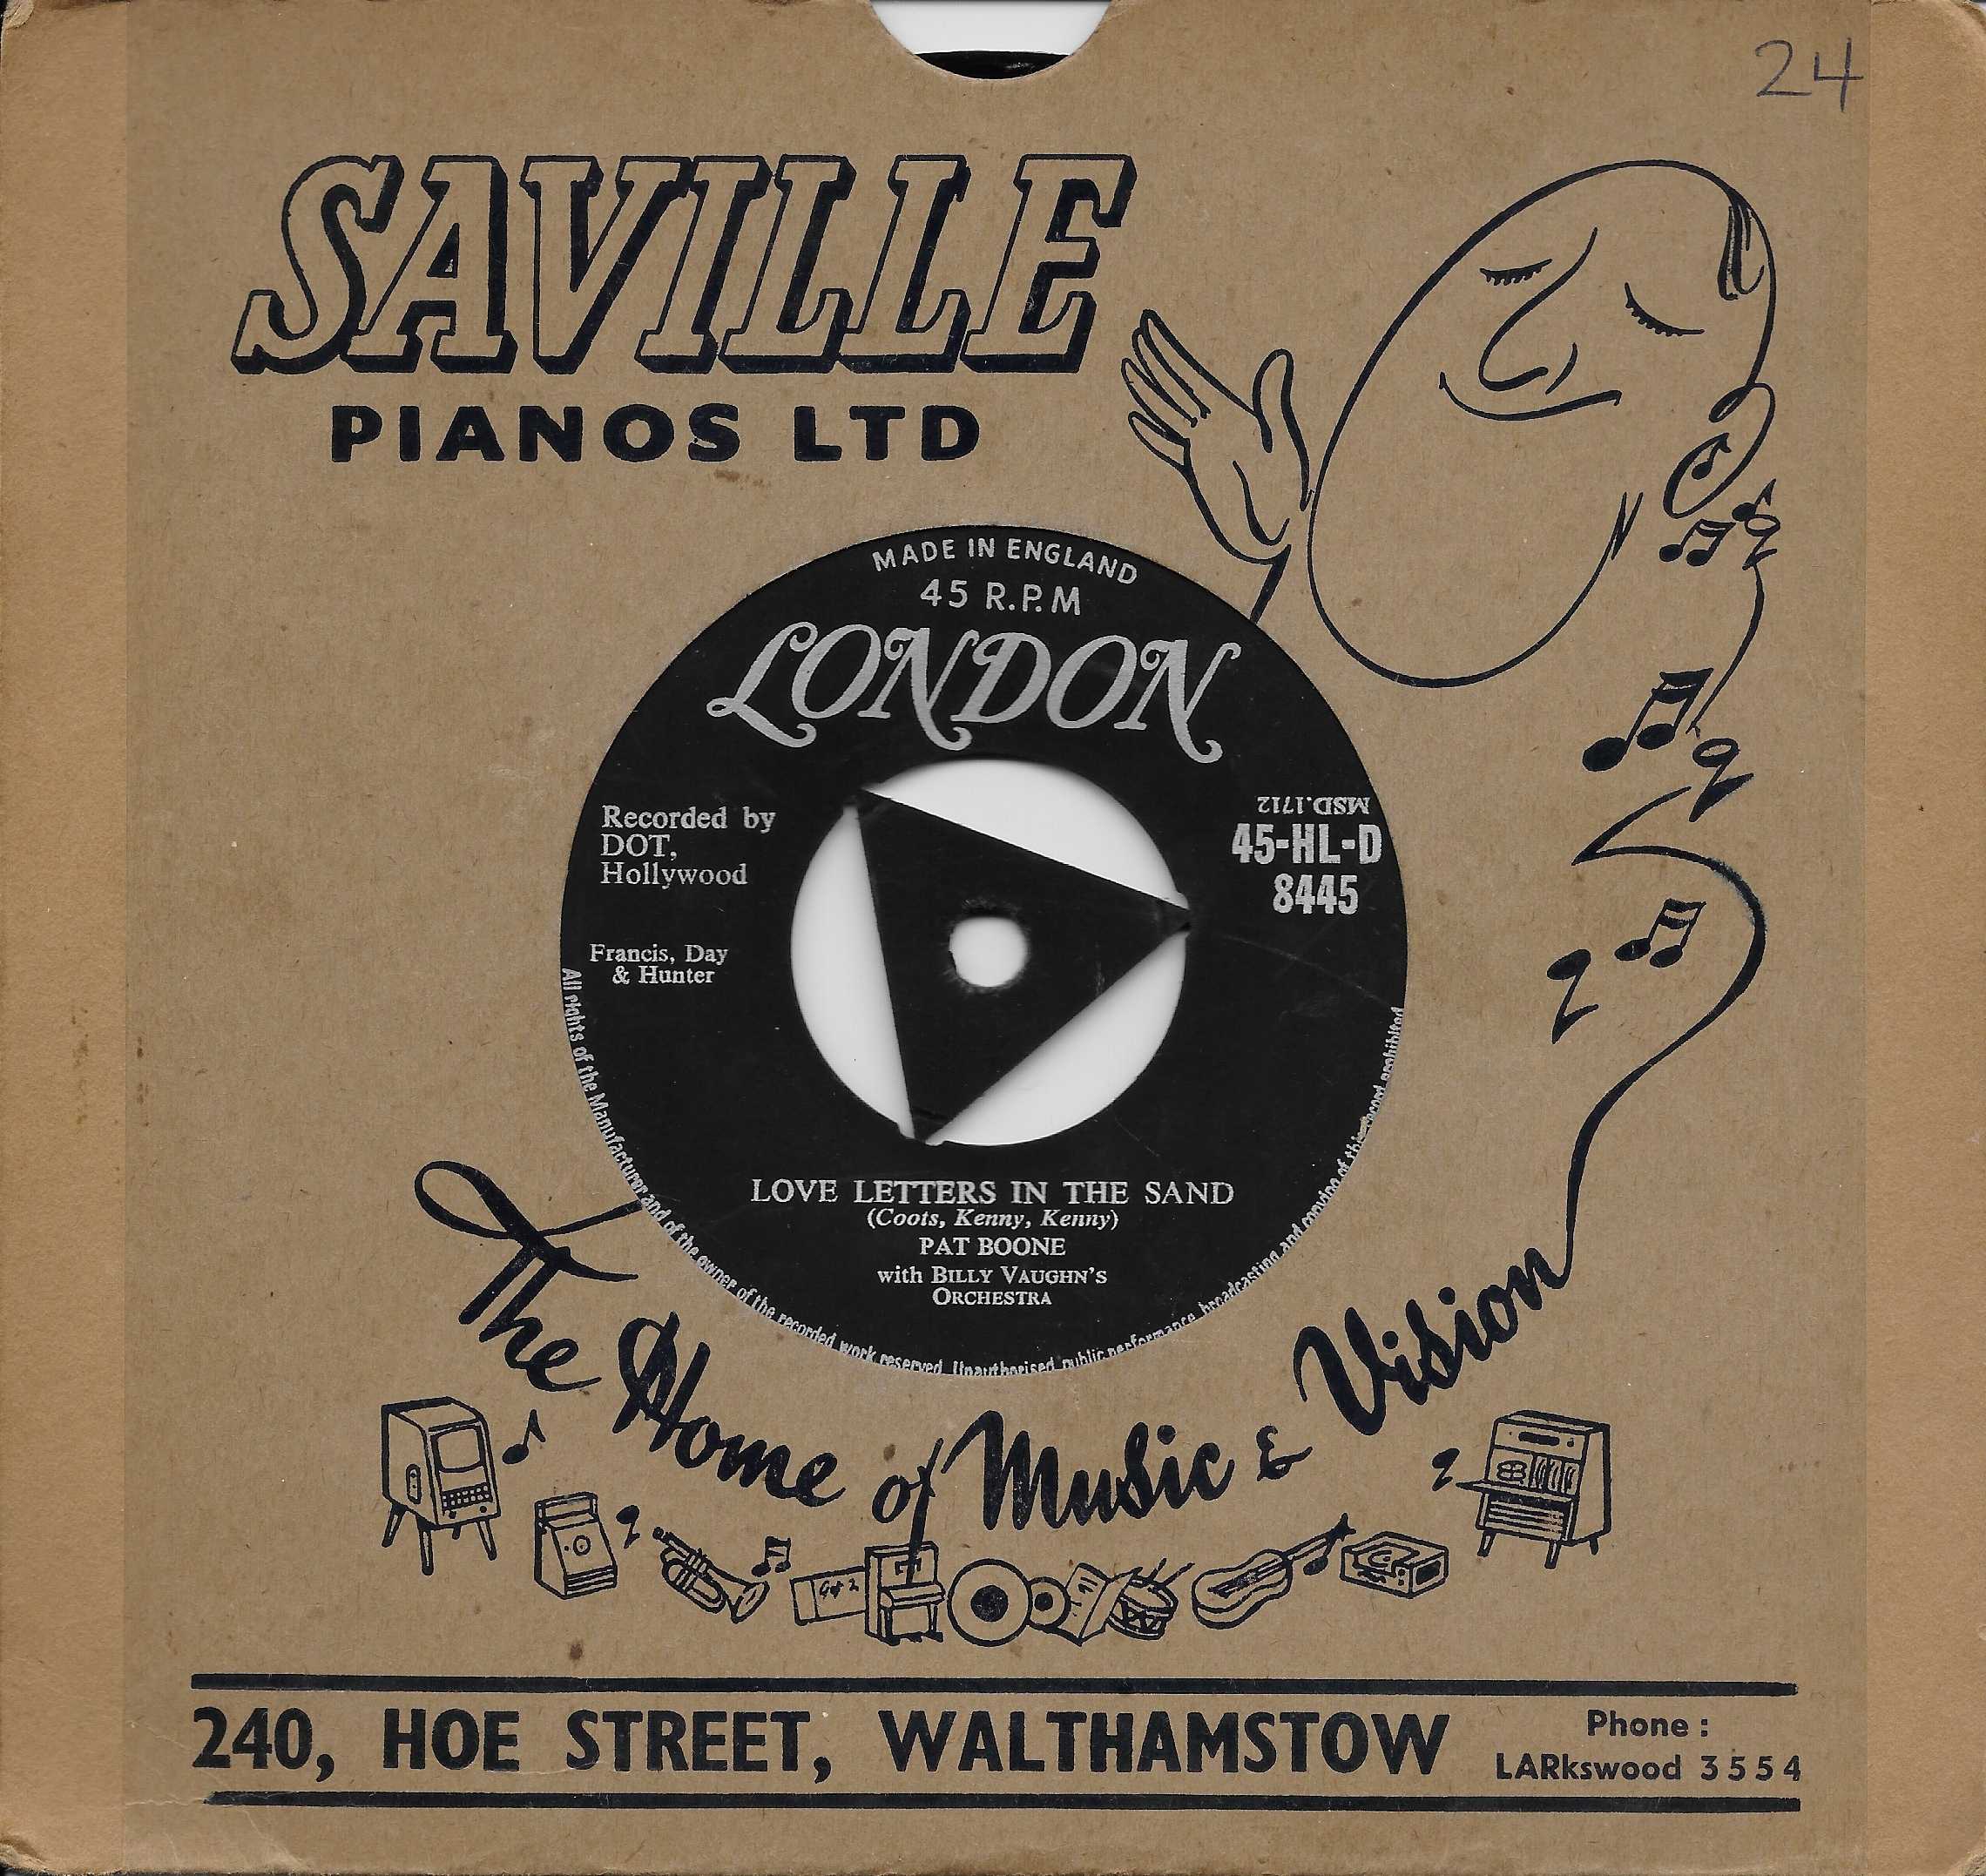 Picture of 45-HL-D 8445 Bernadine by artist J. Mercer / Coots / Kenny / Kenny / Pat Boone with Billy Vaughn's orchestra from ITV, Channel 4 and Channel 5 library